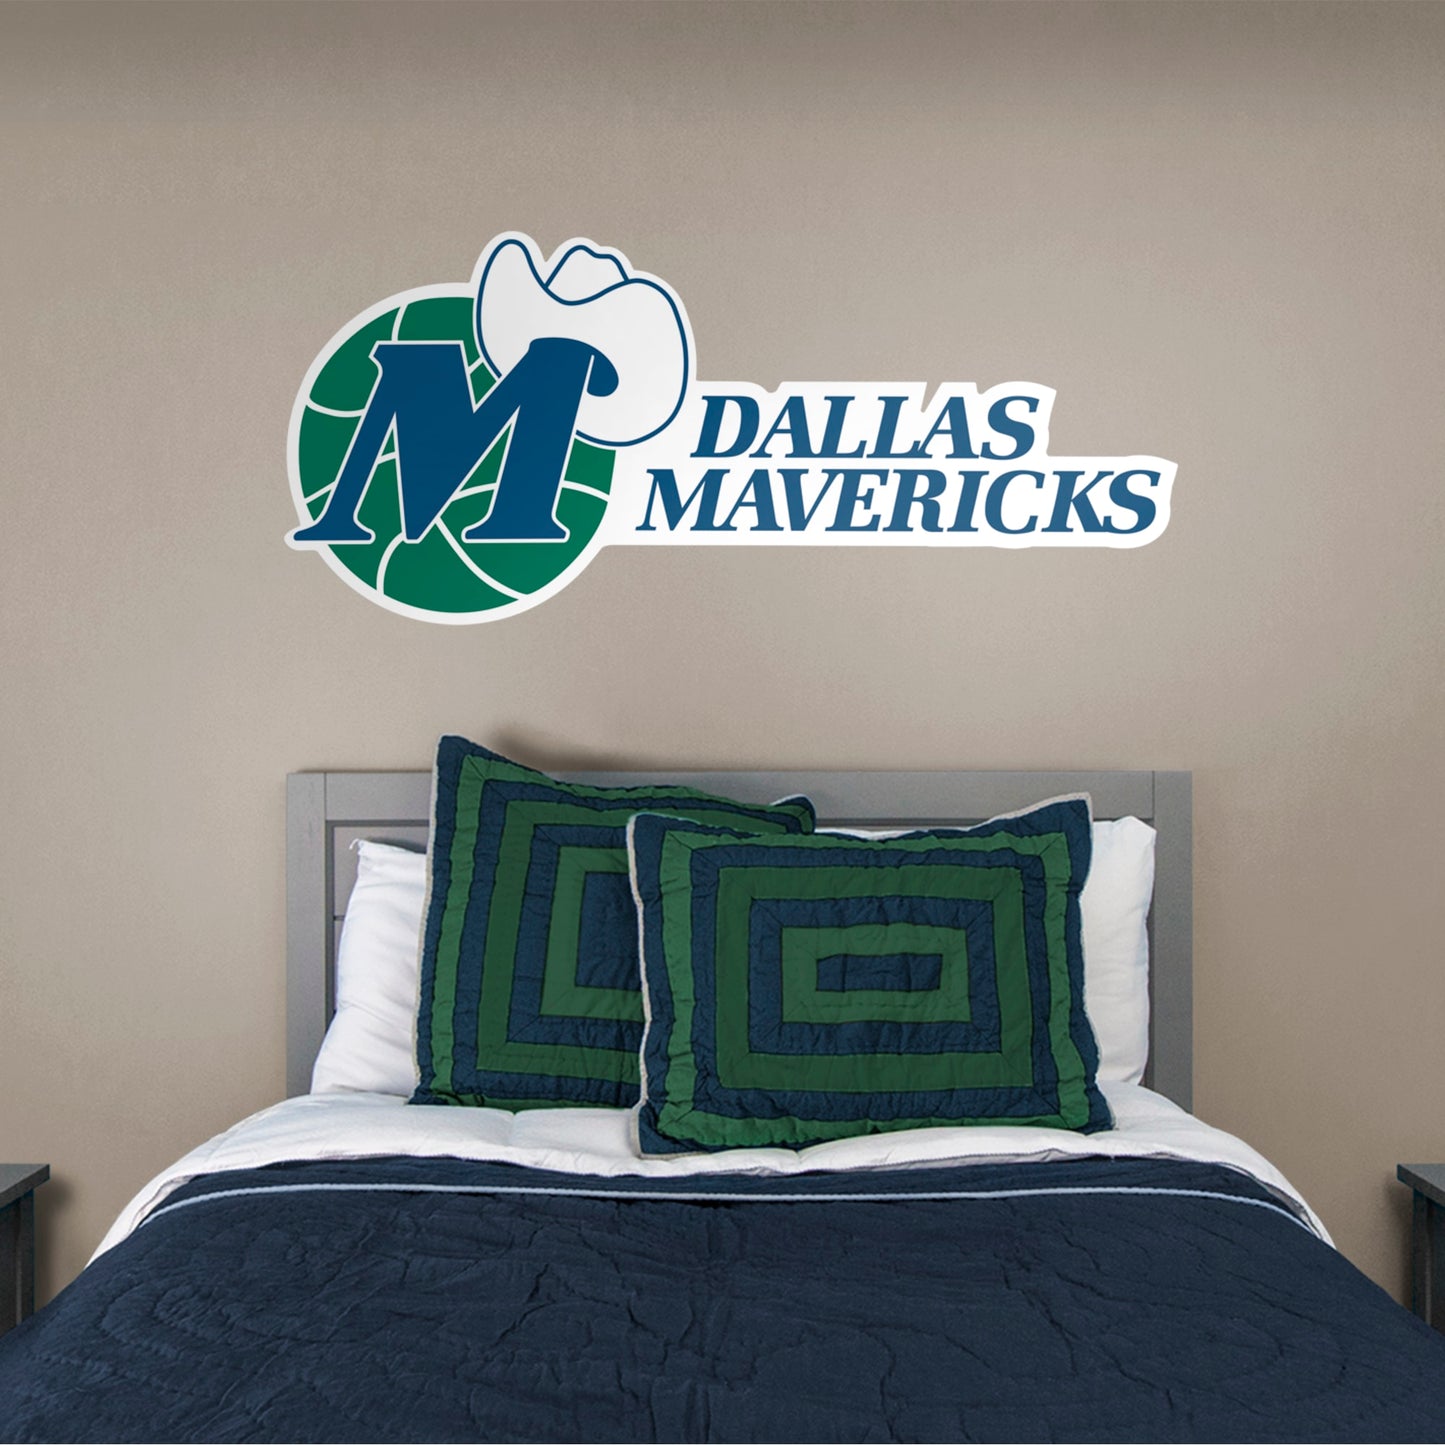 Dallas Mavericks: Classic Logo - Officially Licensed NBA Removable Wall Decal